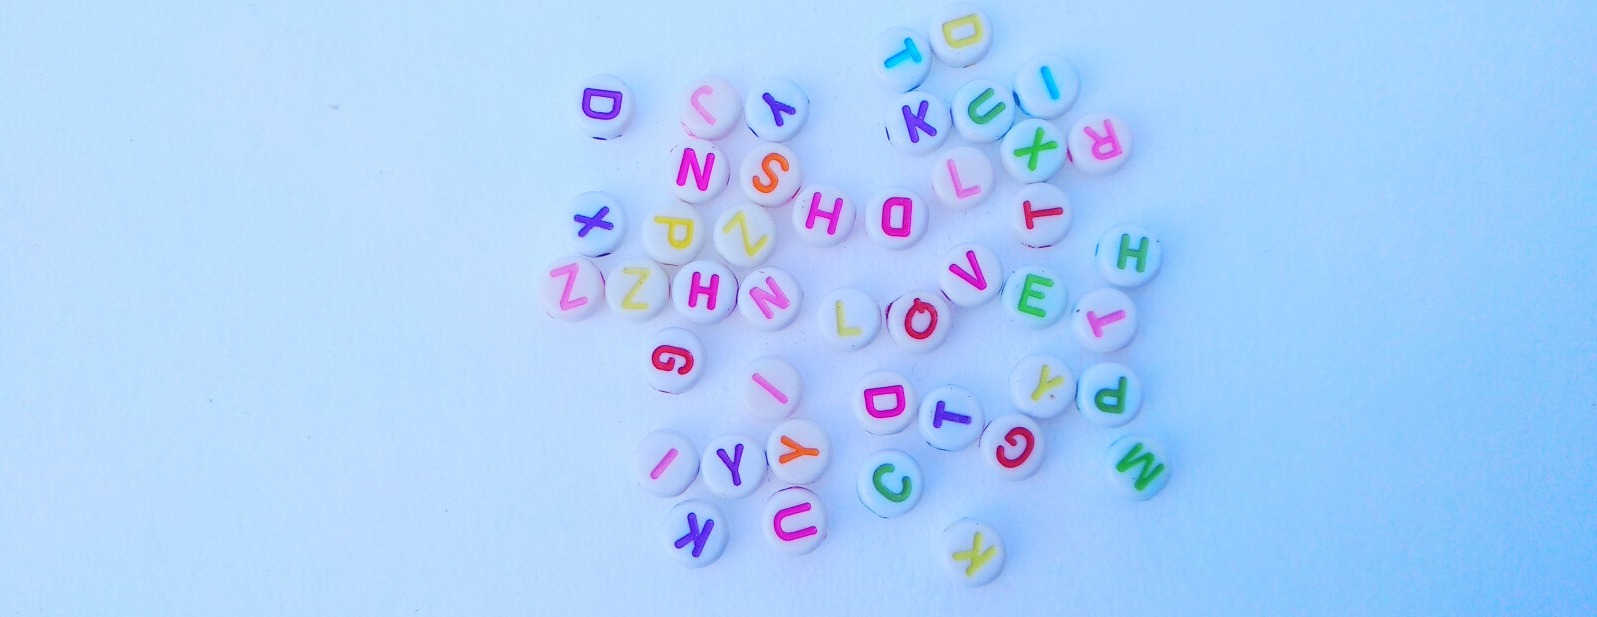 Colorful Letters Jumbled Up - Ladies Blog